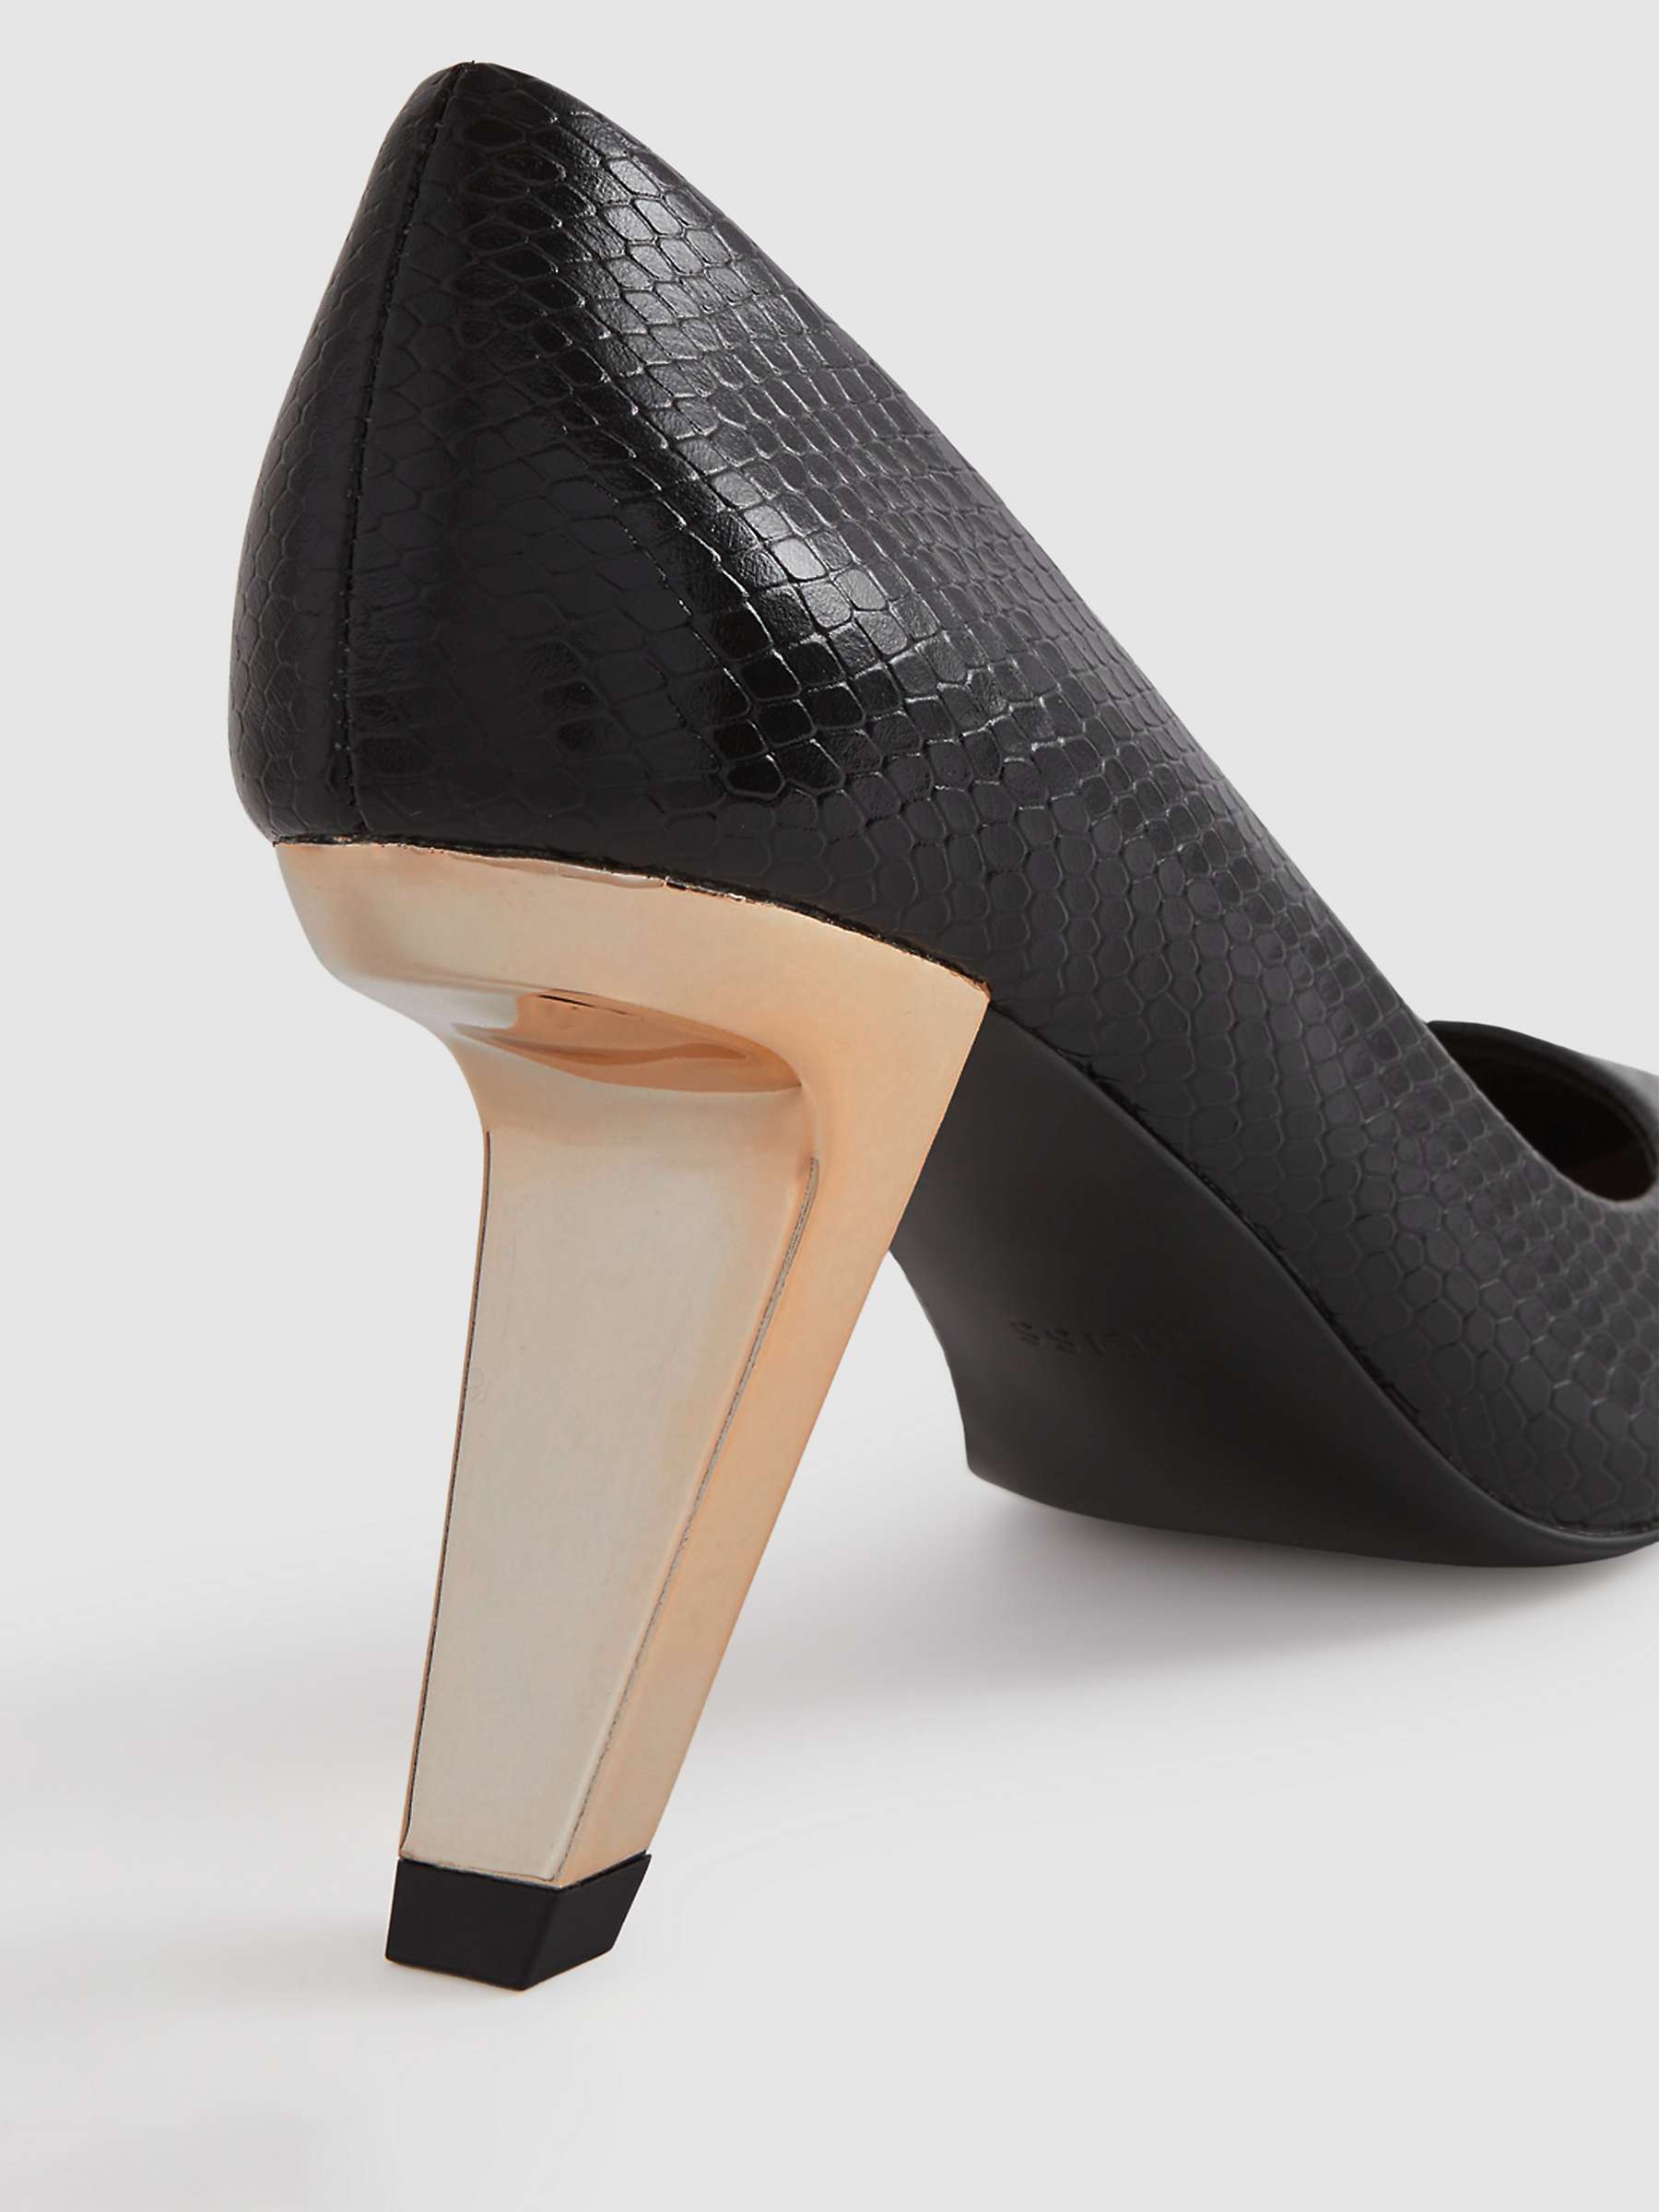 Buy Reiss Monroe Leather Angled Heel Court Shoes, Black Online at johnlewis.com